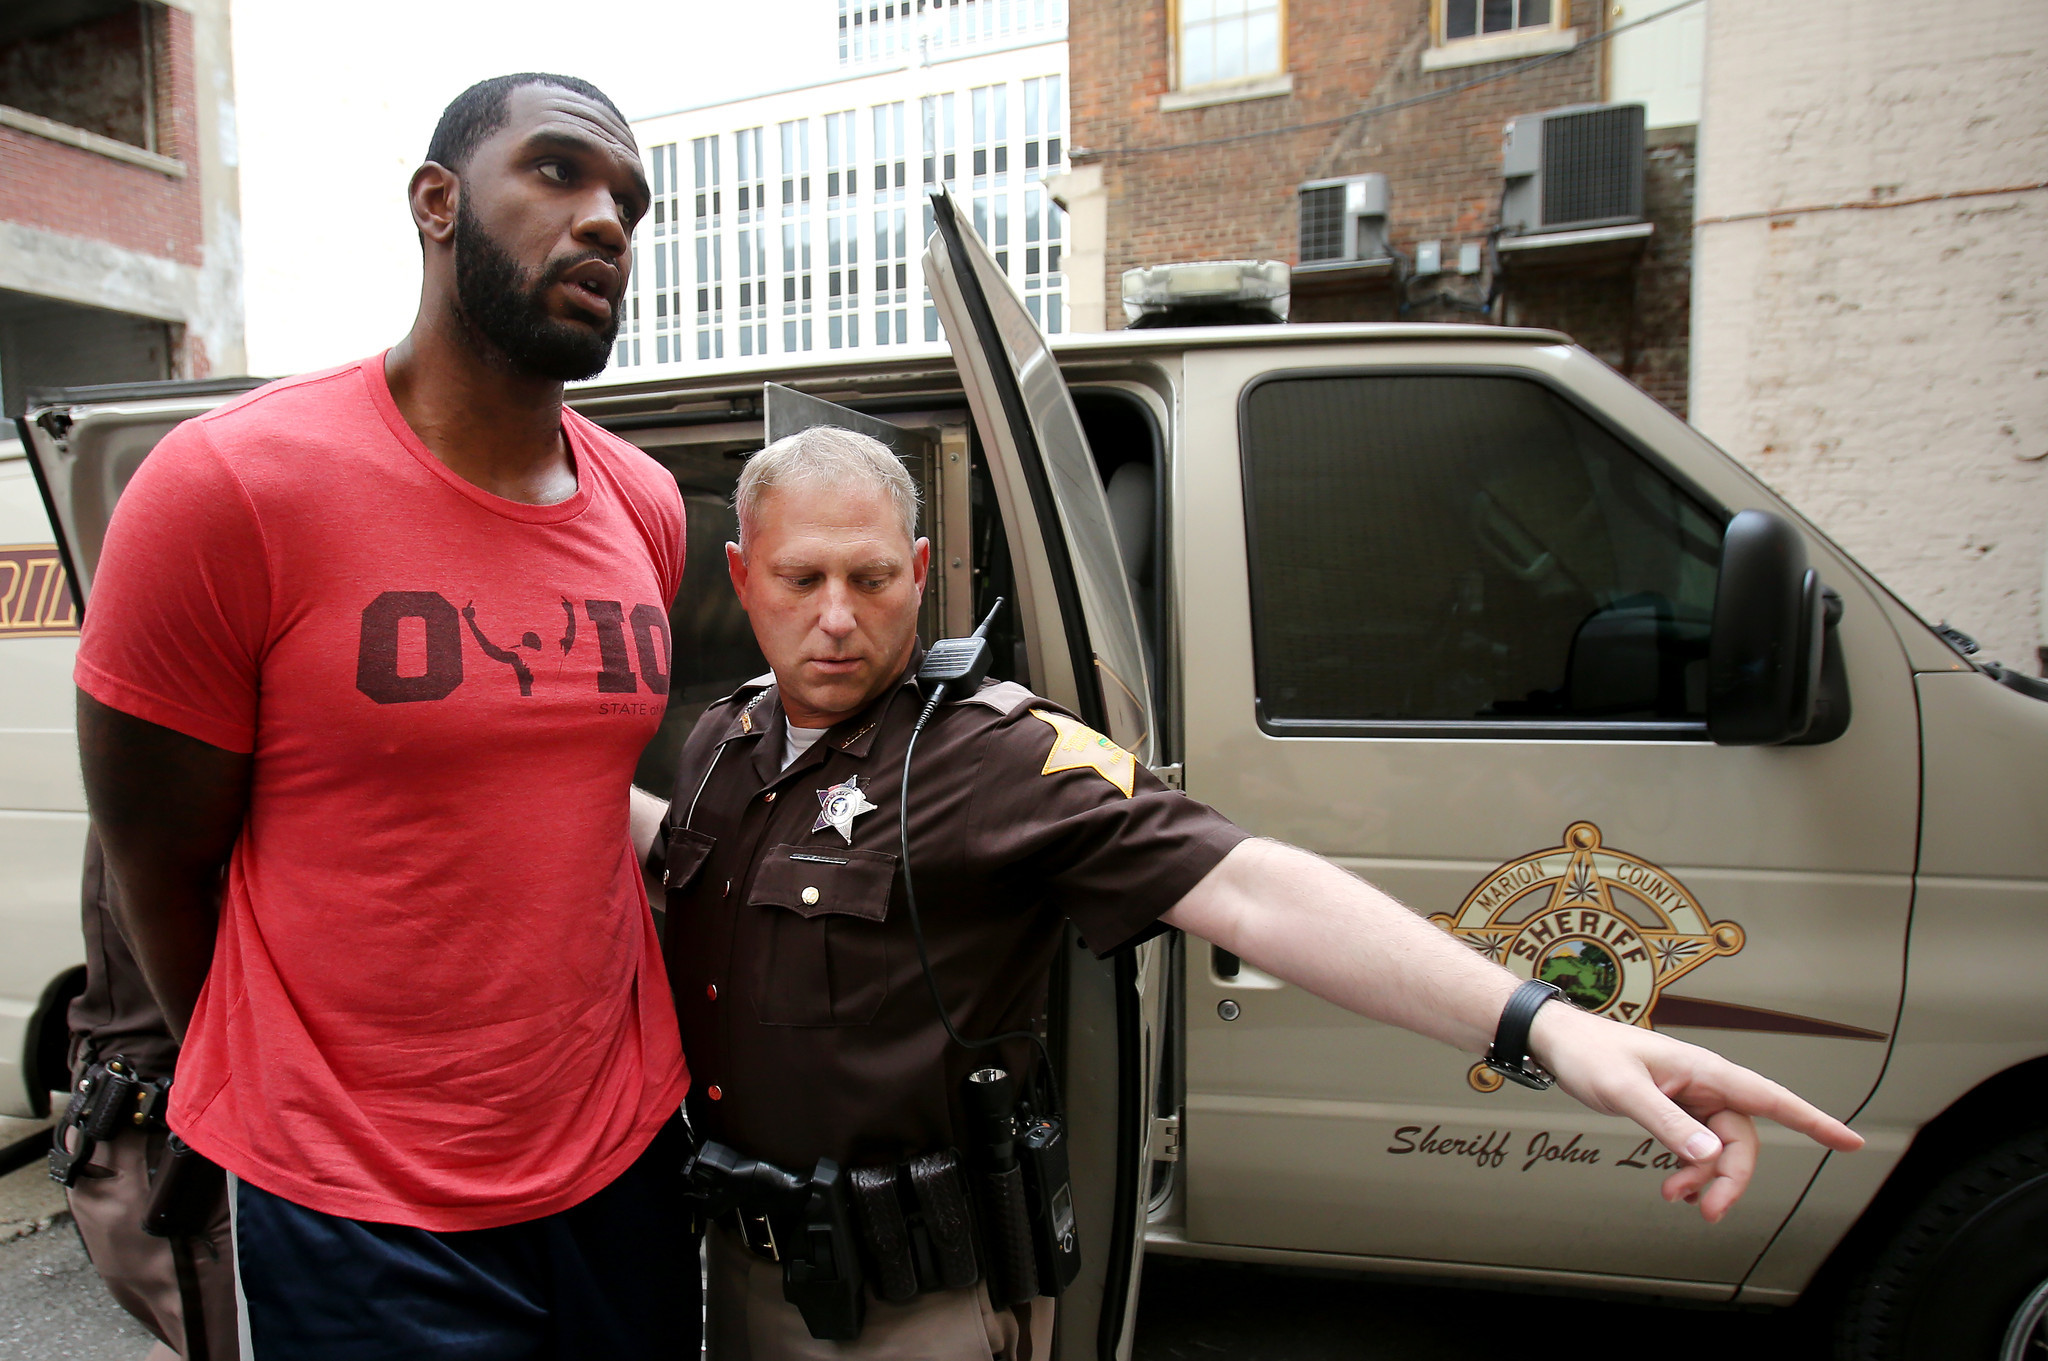 Greg Oden accused of breaking ex-girlfriend's nose during assault - LA Times